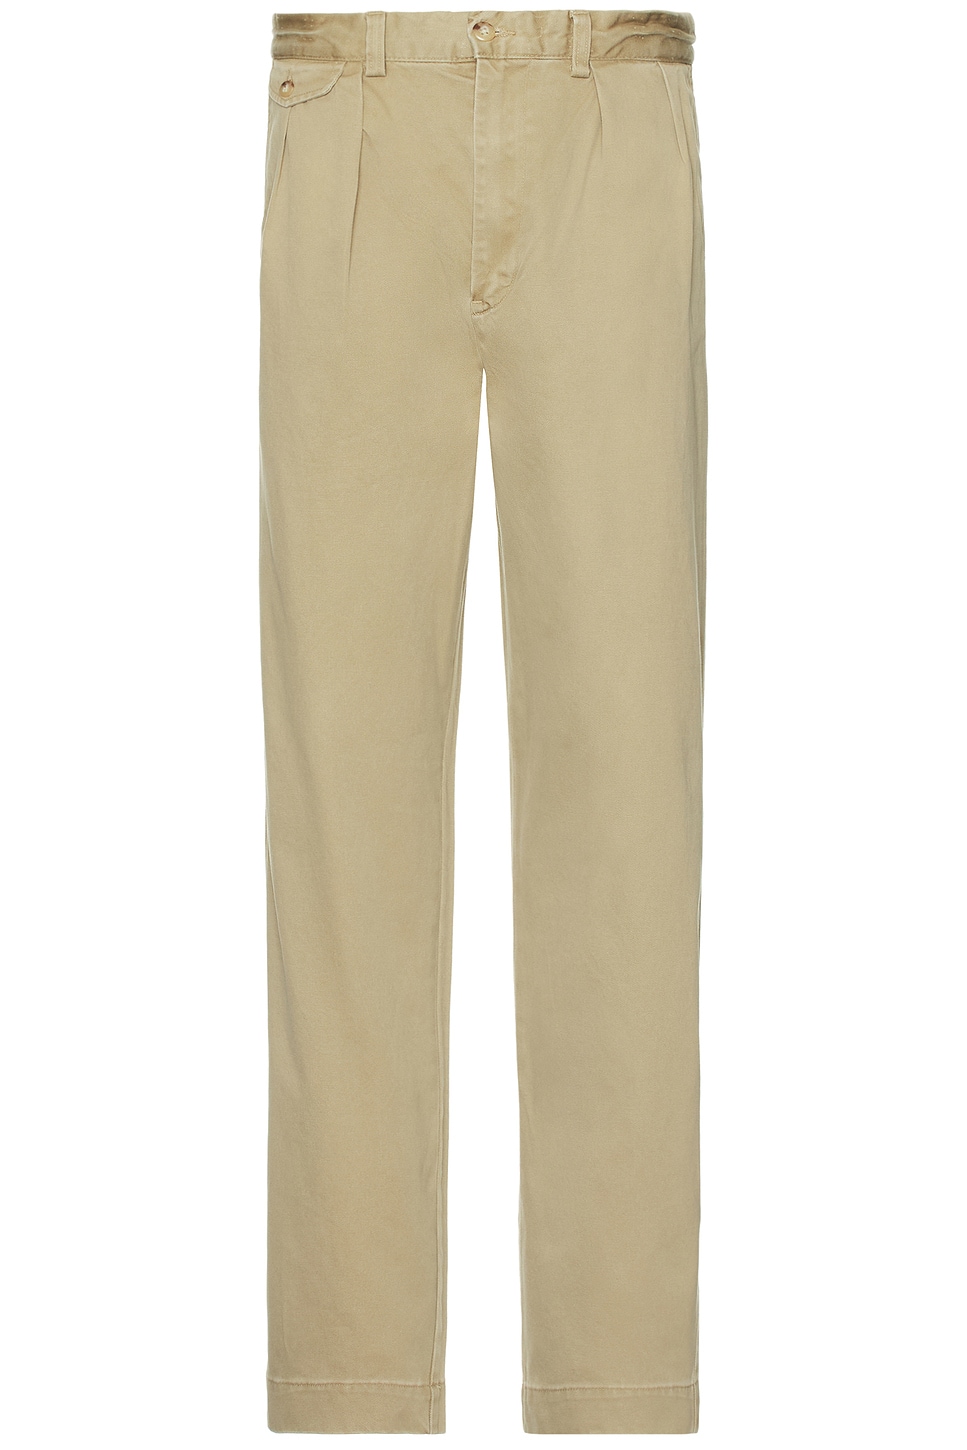 Image 1 of Polo Ralph Lauren Heritage Chino Pleated Pant in Rl Khaki